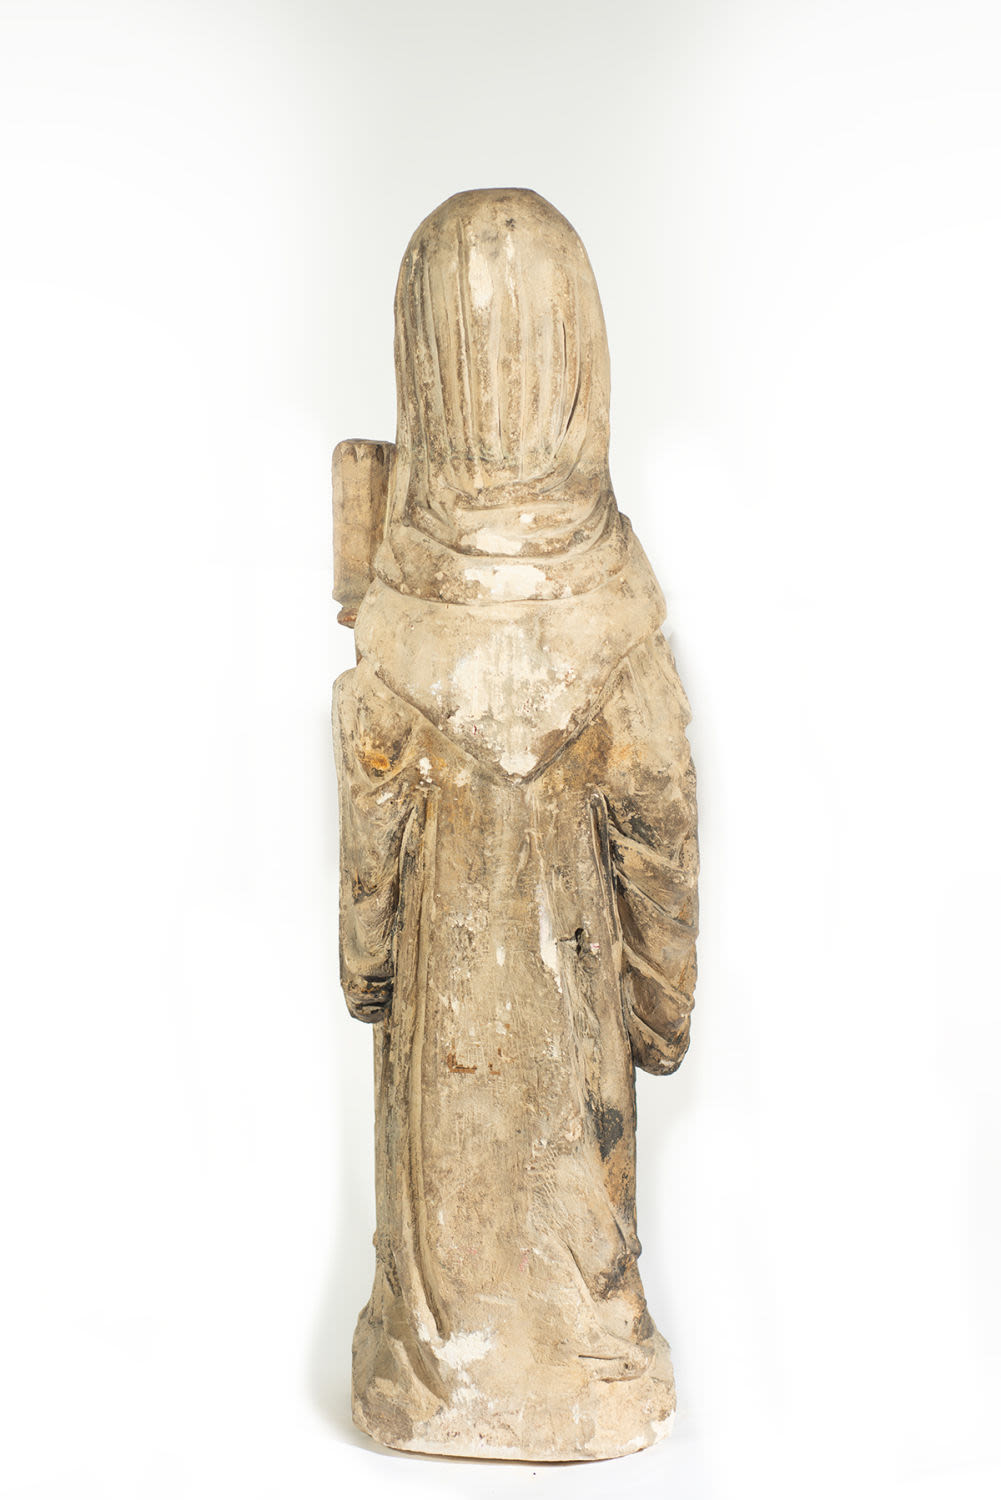 Large Gothic Stone St Bernard de Clairvaux (French Medieval Gothic of the 14th - 15th centuries - Image 4 of 4